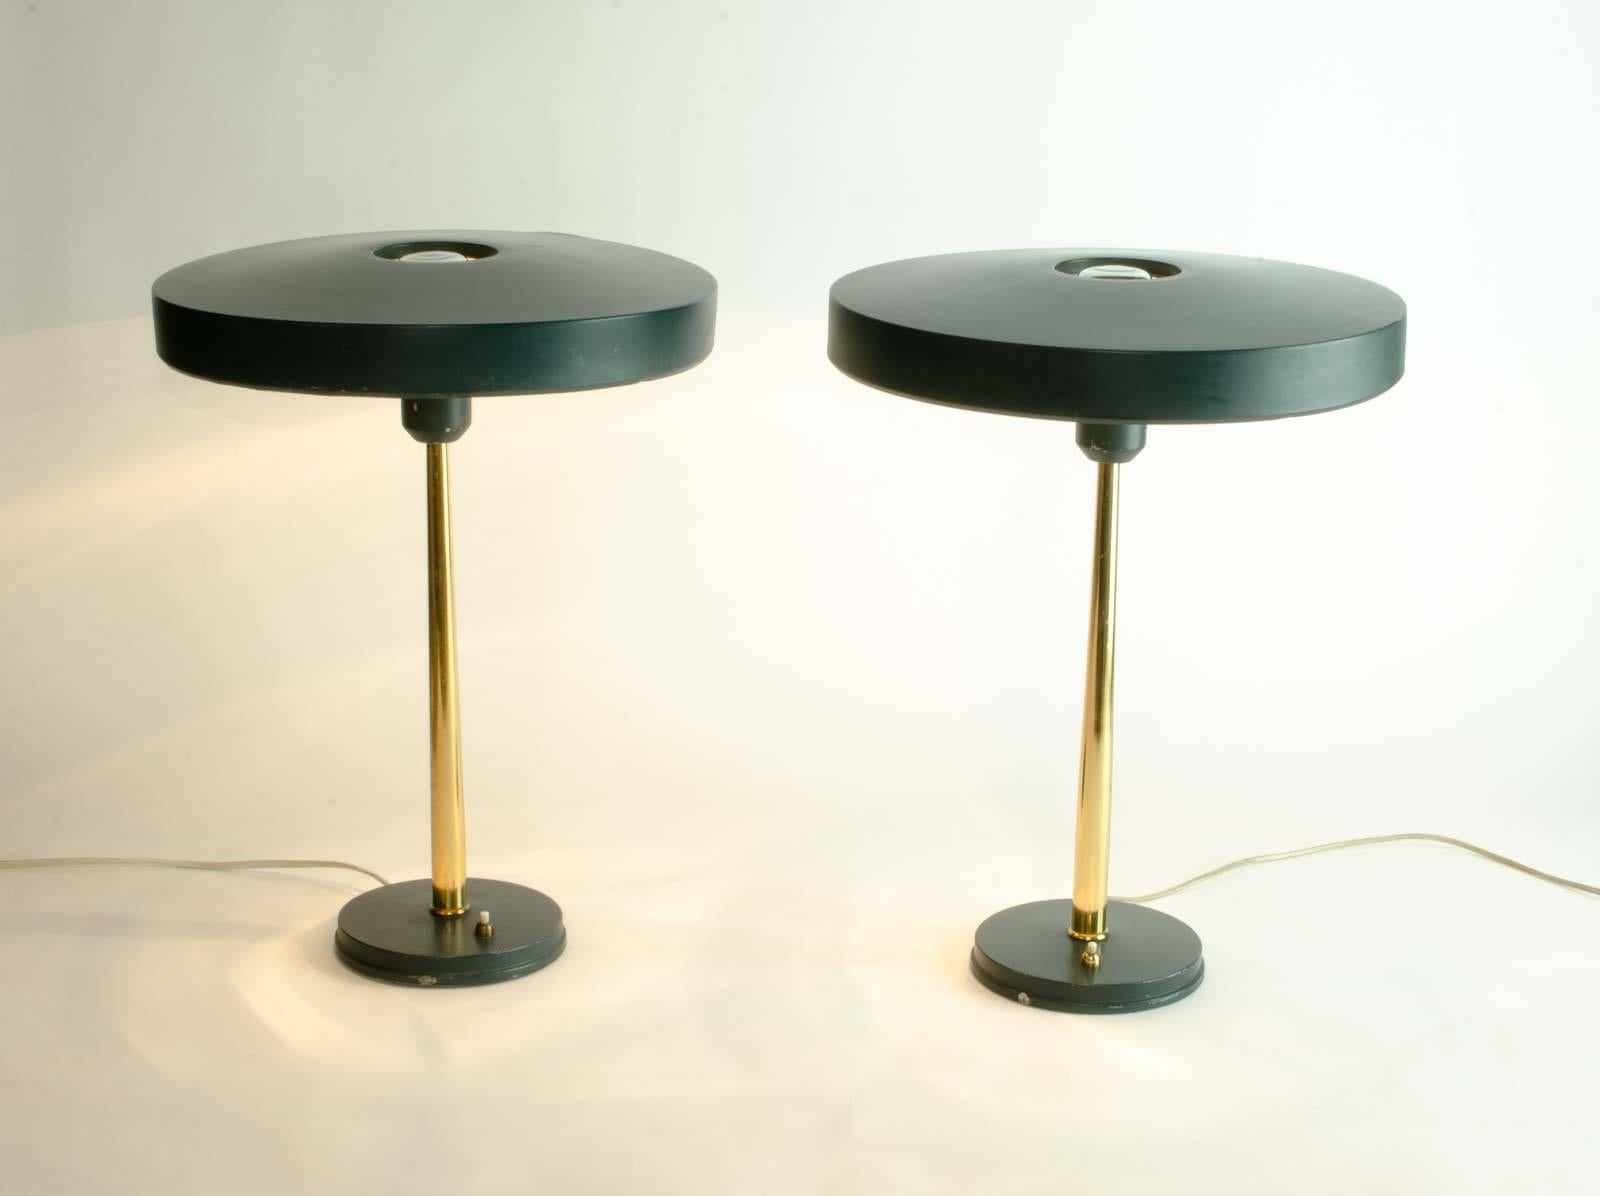 Midcentury original pair of brass table / desk lamps in dark green, designed by Louis Kalff for Philips, The Netherlands. 
This famous 'Timor 69' Dutch design features a dark green foot and an UFO shaped aluminium lampshade on a brass pedestal.